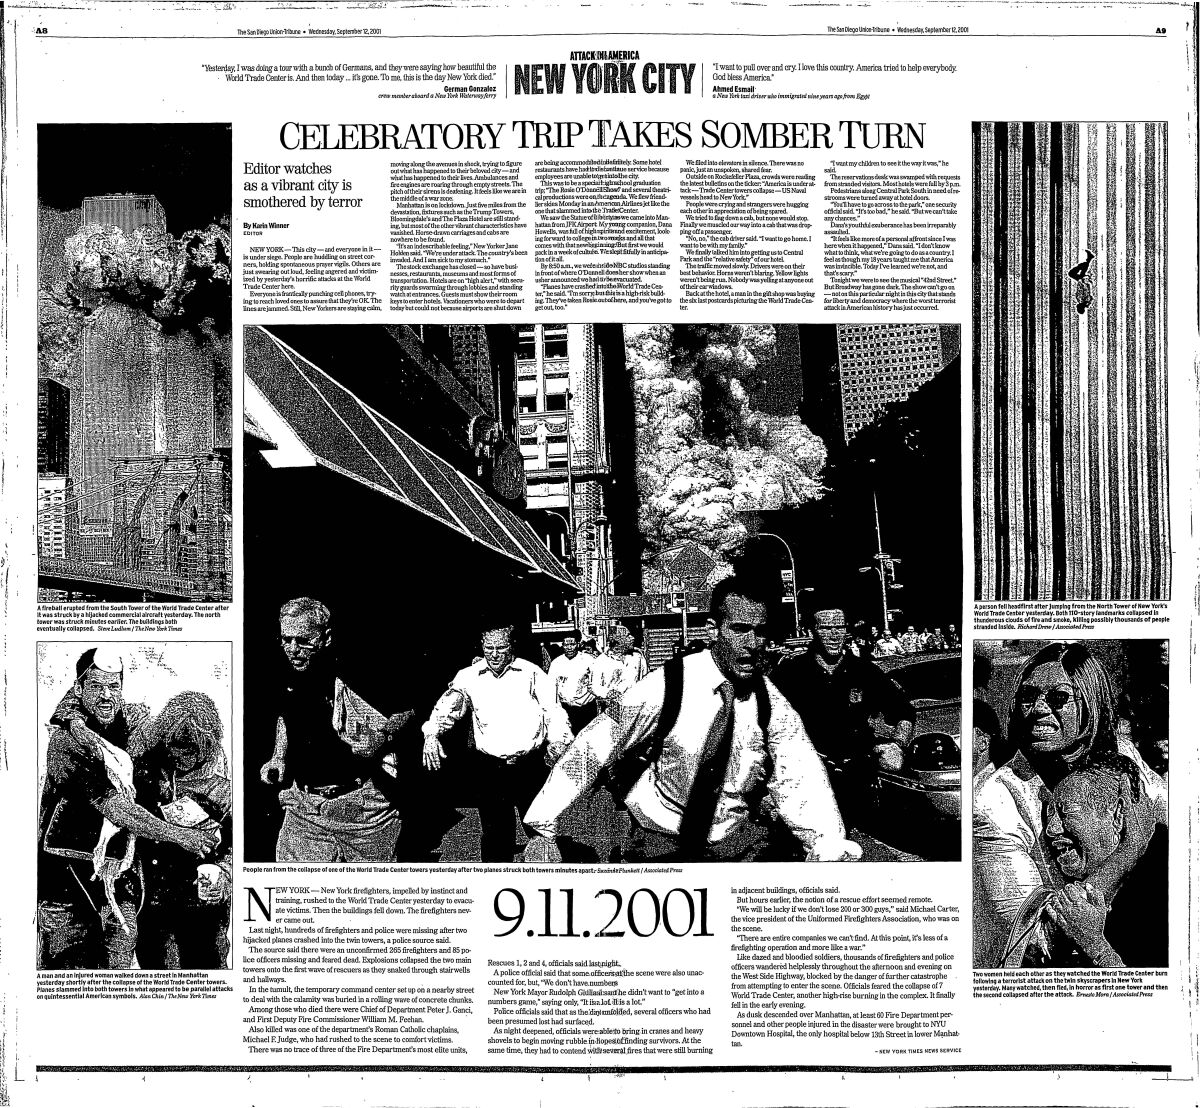 Two pages on New York City from The San Diego Union-Tribune Sept. 12, 2001.